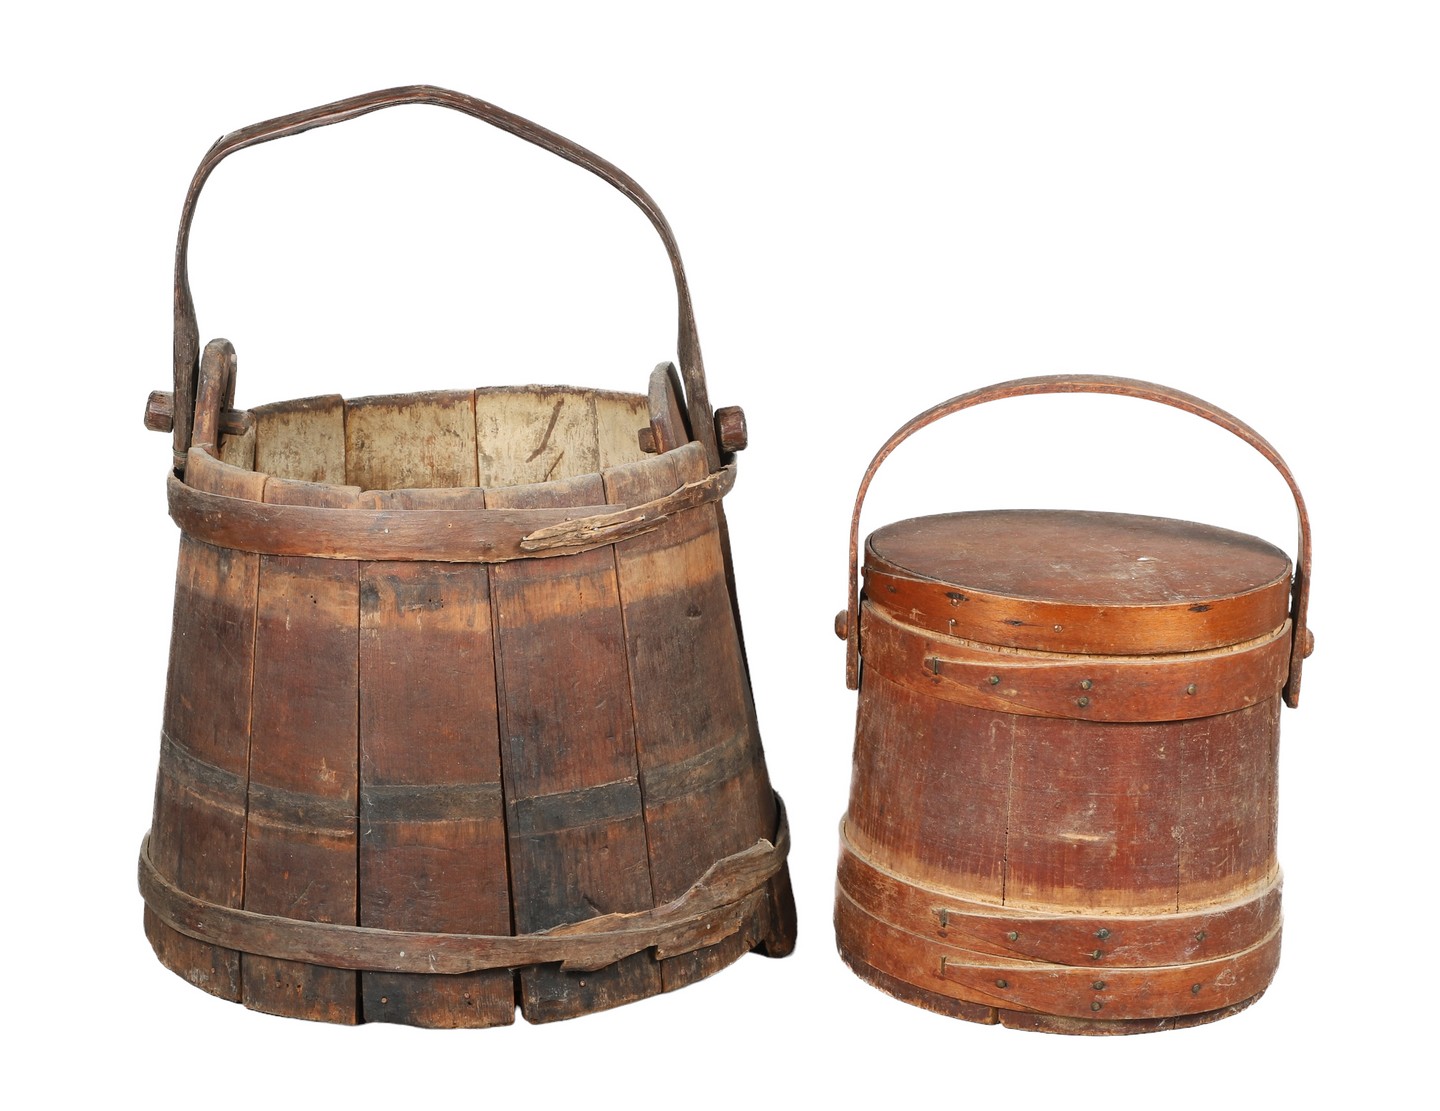  2 Wooden buckets c o covered 2e069f